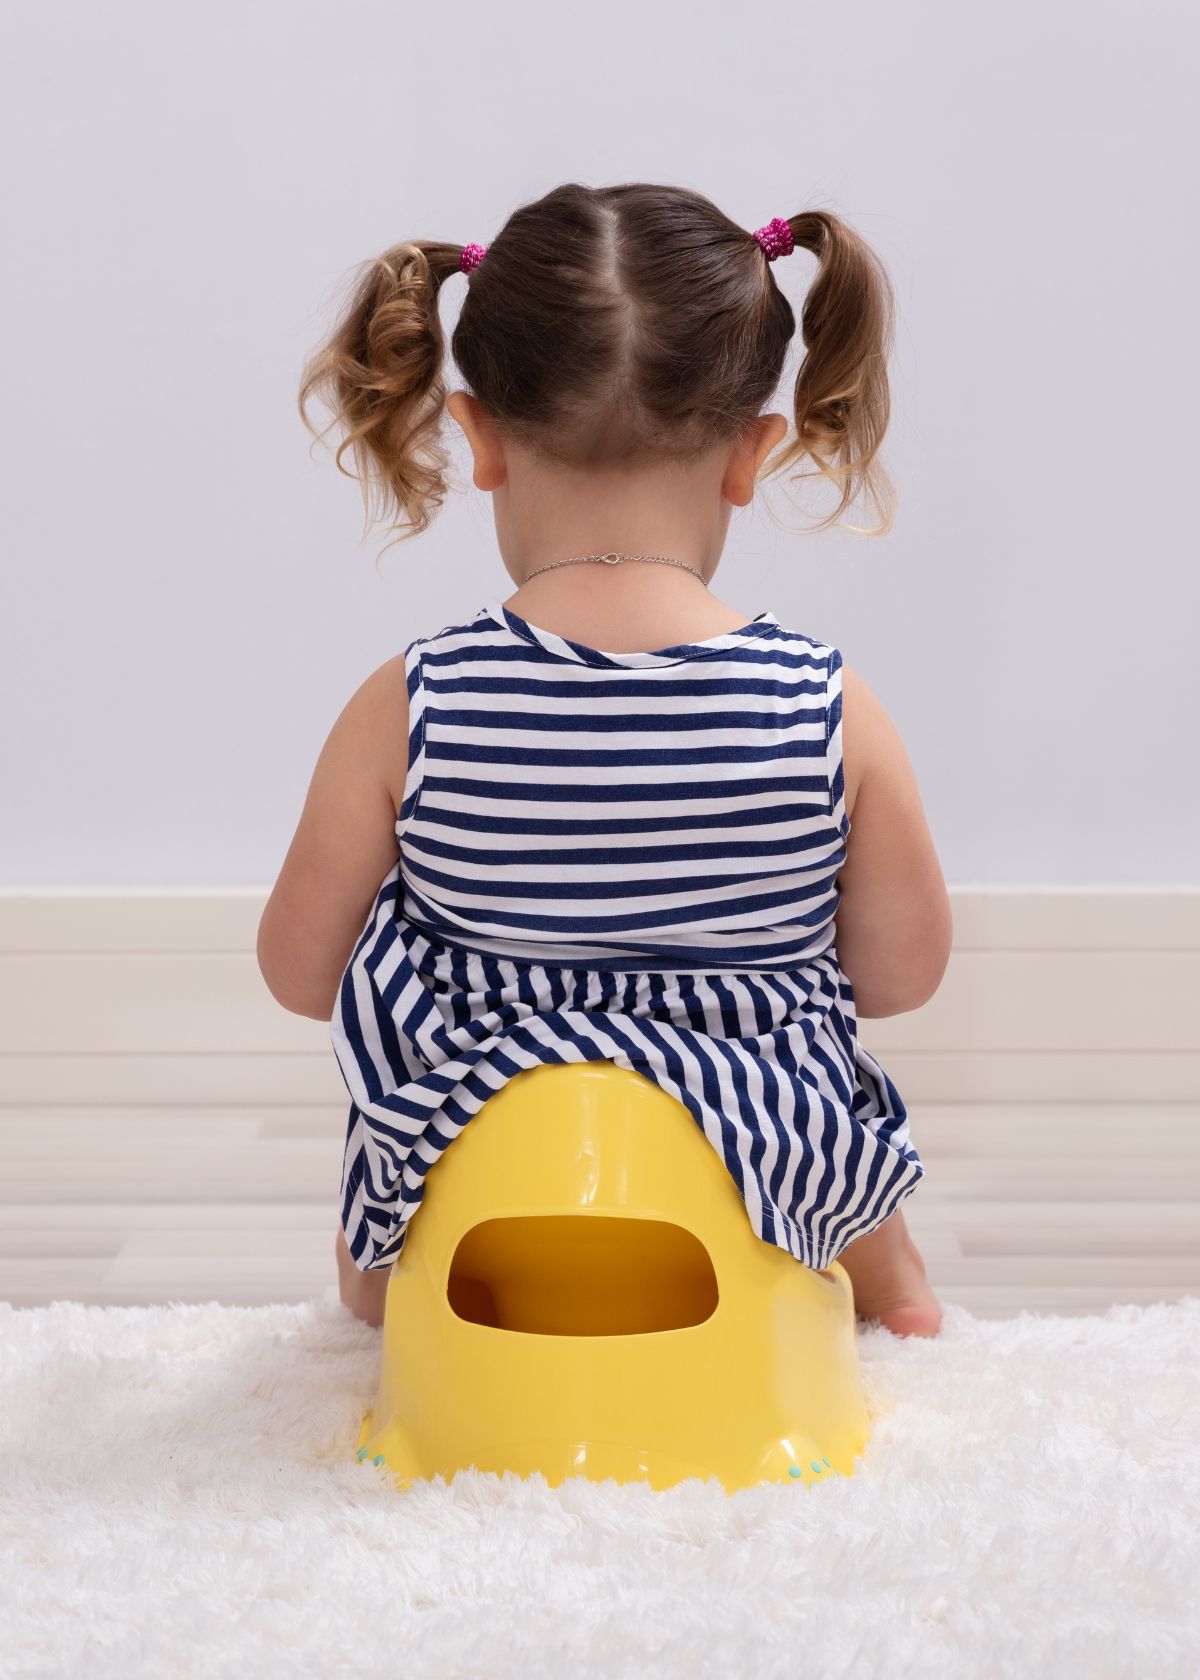 How to Clean a Toddler Potty Chair: Minimize the Mess!